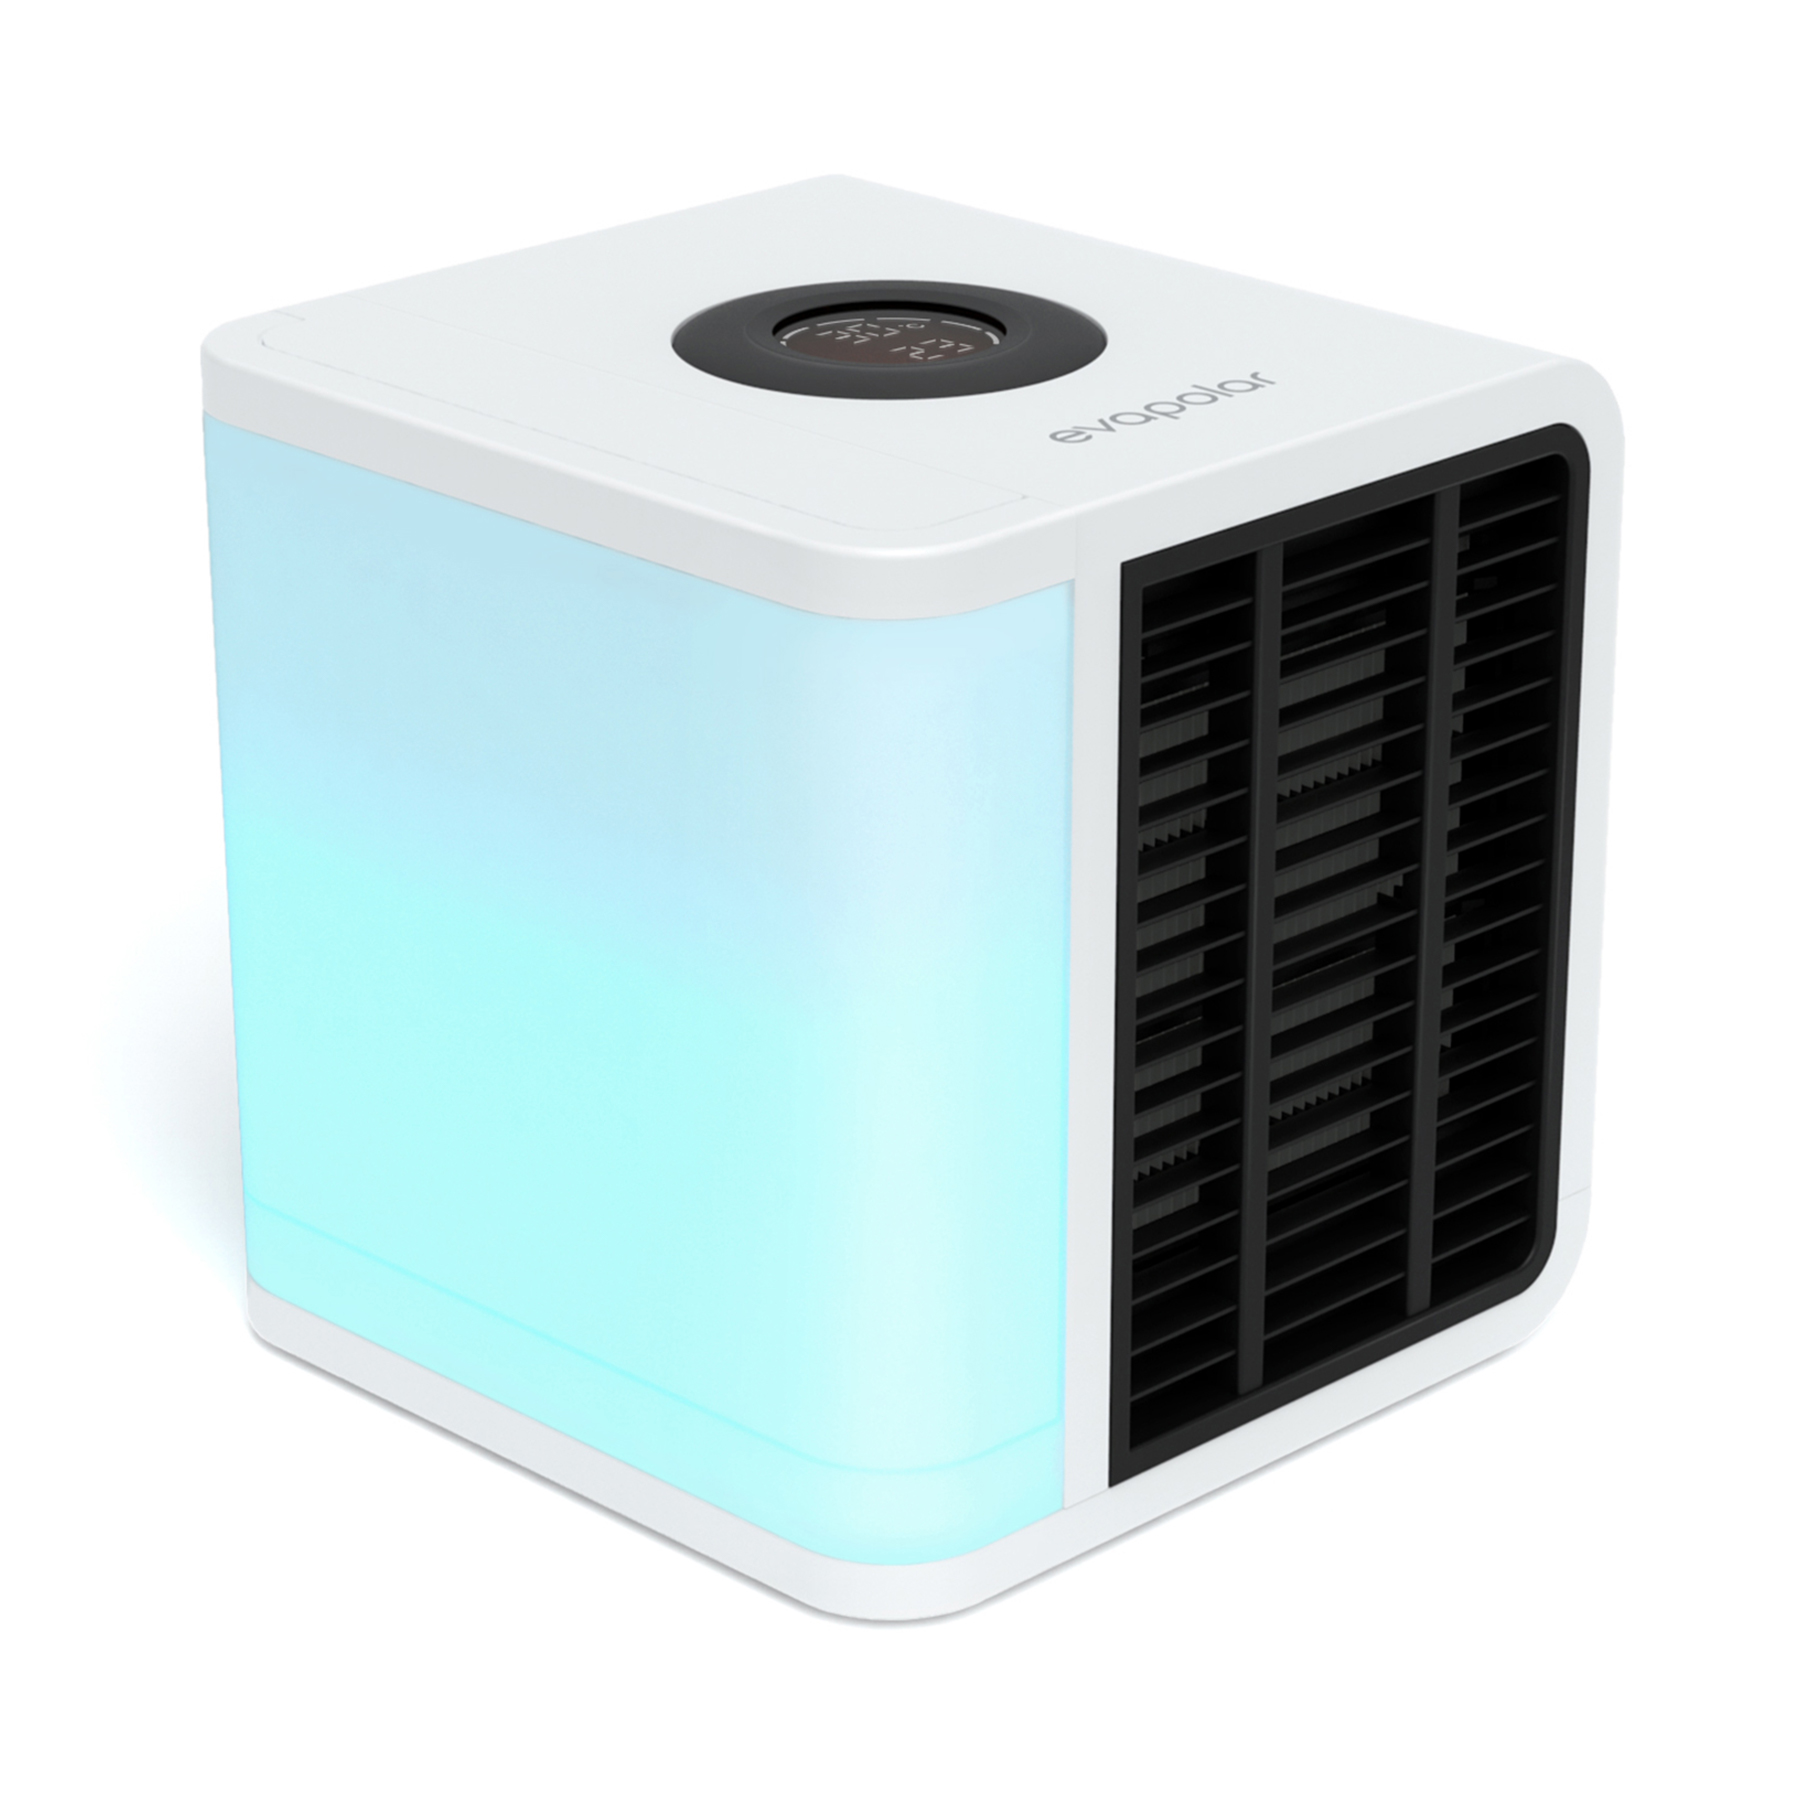 Evapolar evaLIGHT Plus Personal Portable Air Cooler, Evaporative Mini Air Cooler, Portable Air Conditioner, Humidifier, USB Connectivity and LED Light, 1000 ml - image 1 of 7